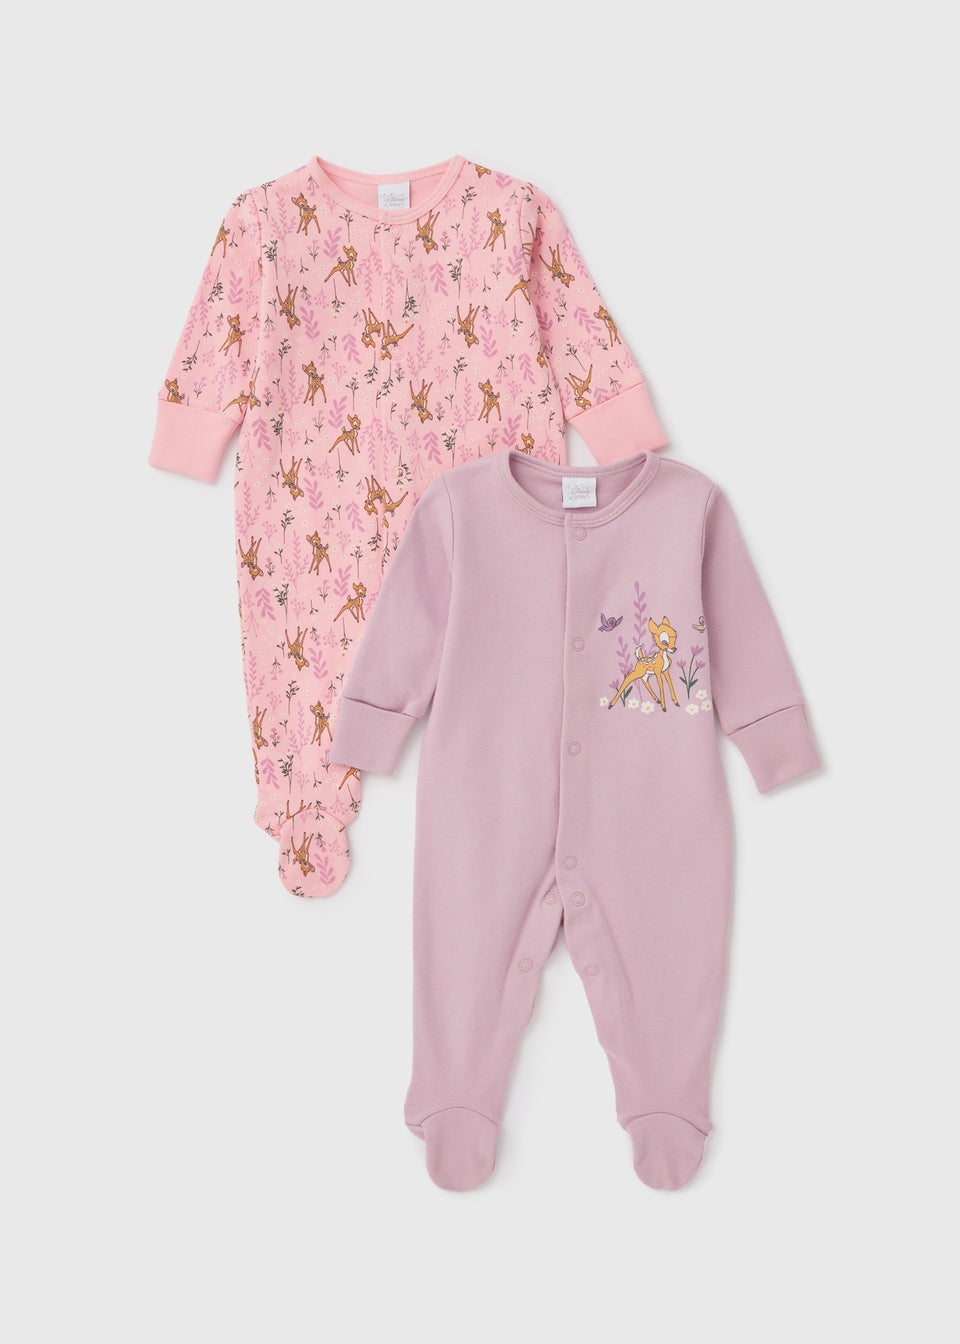 Disney Baby 2 Pack Pink Bambi Sleepsuits (Tiny Baby-18mths)